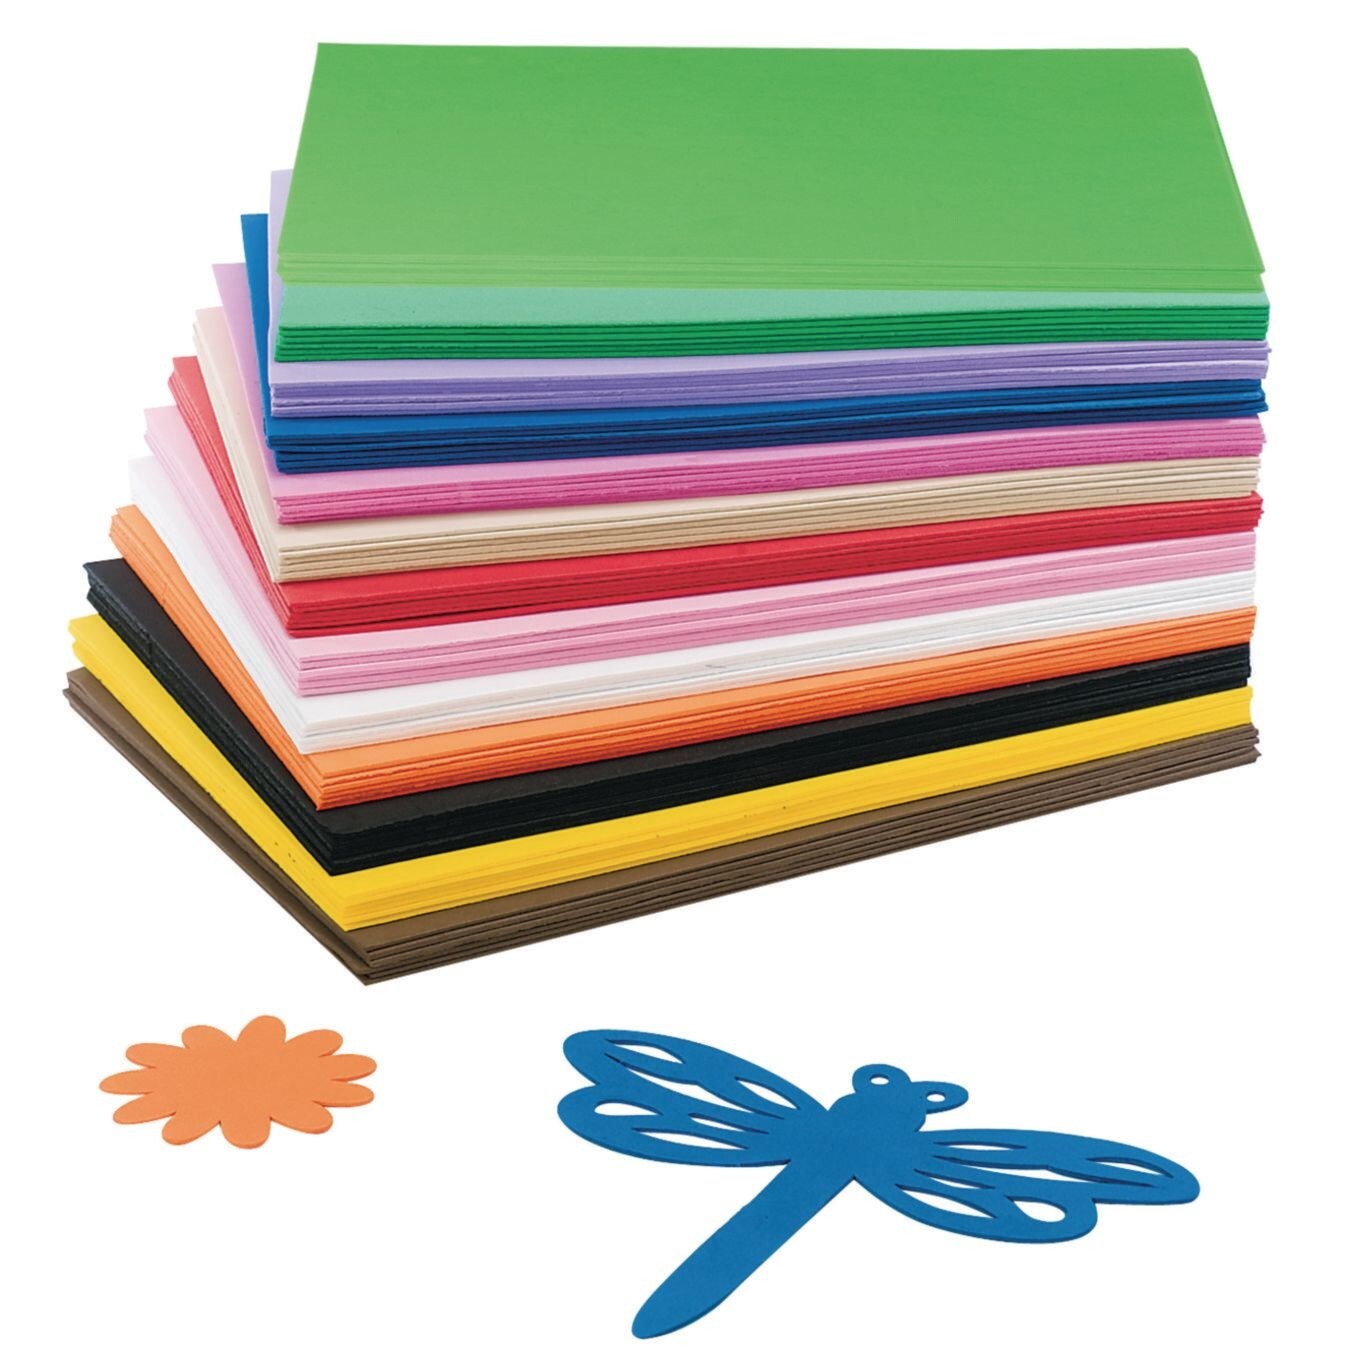 S&#x26;S Worldwide Color Splash! EVA Foam Sheets Assortment, 6 Each of 13 Bright Colors Kids Love, Cut to Any Shape With Scissors, 9&#x22; x 12&#x22; x 2mm thick. Pack of 78.